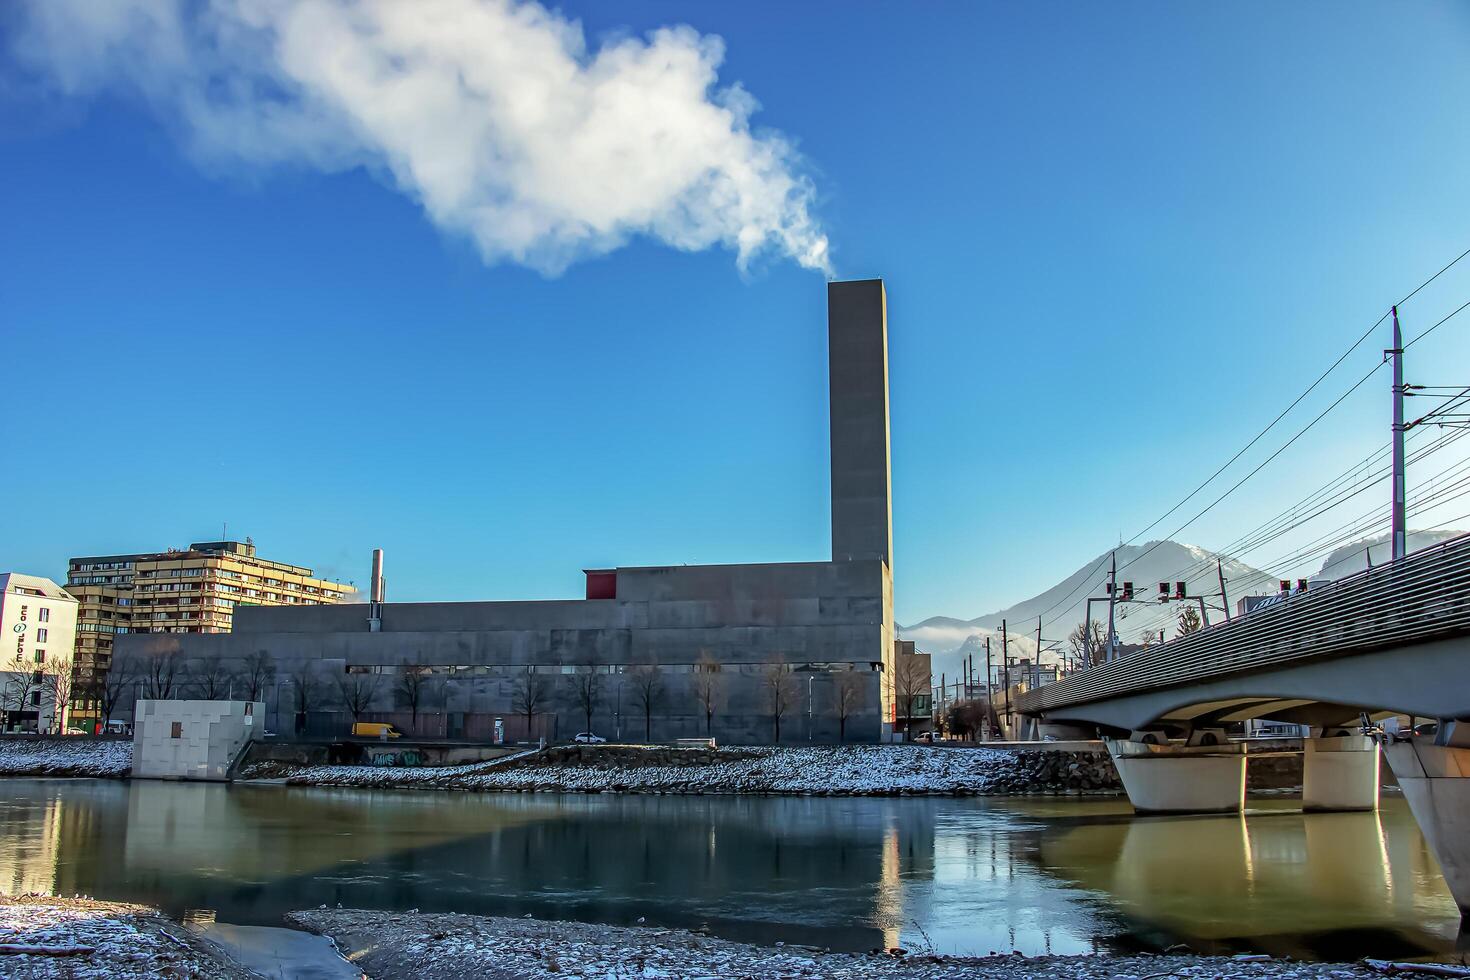 The thermal power plant Salzburg Mitte is located on the banks of the Salzach. photo